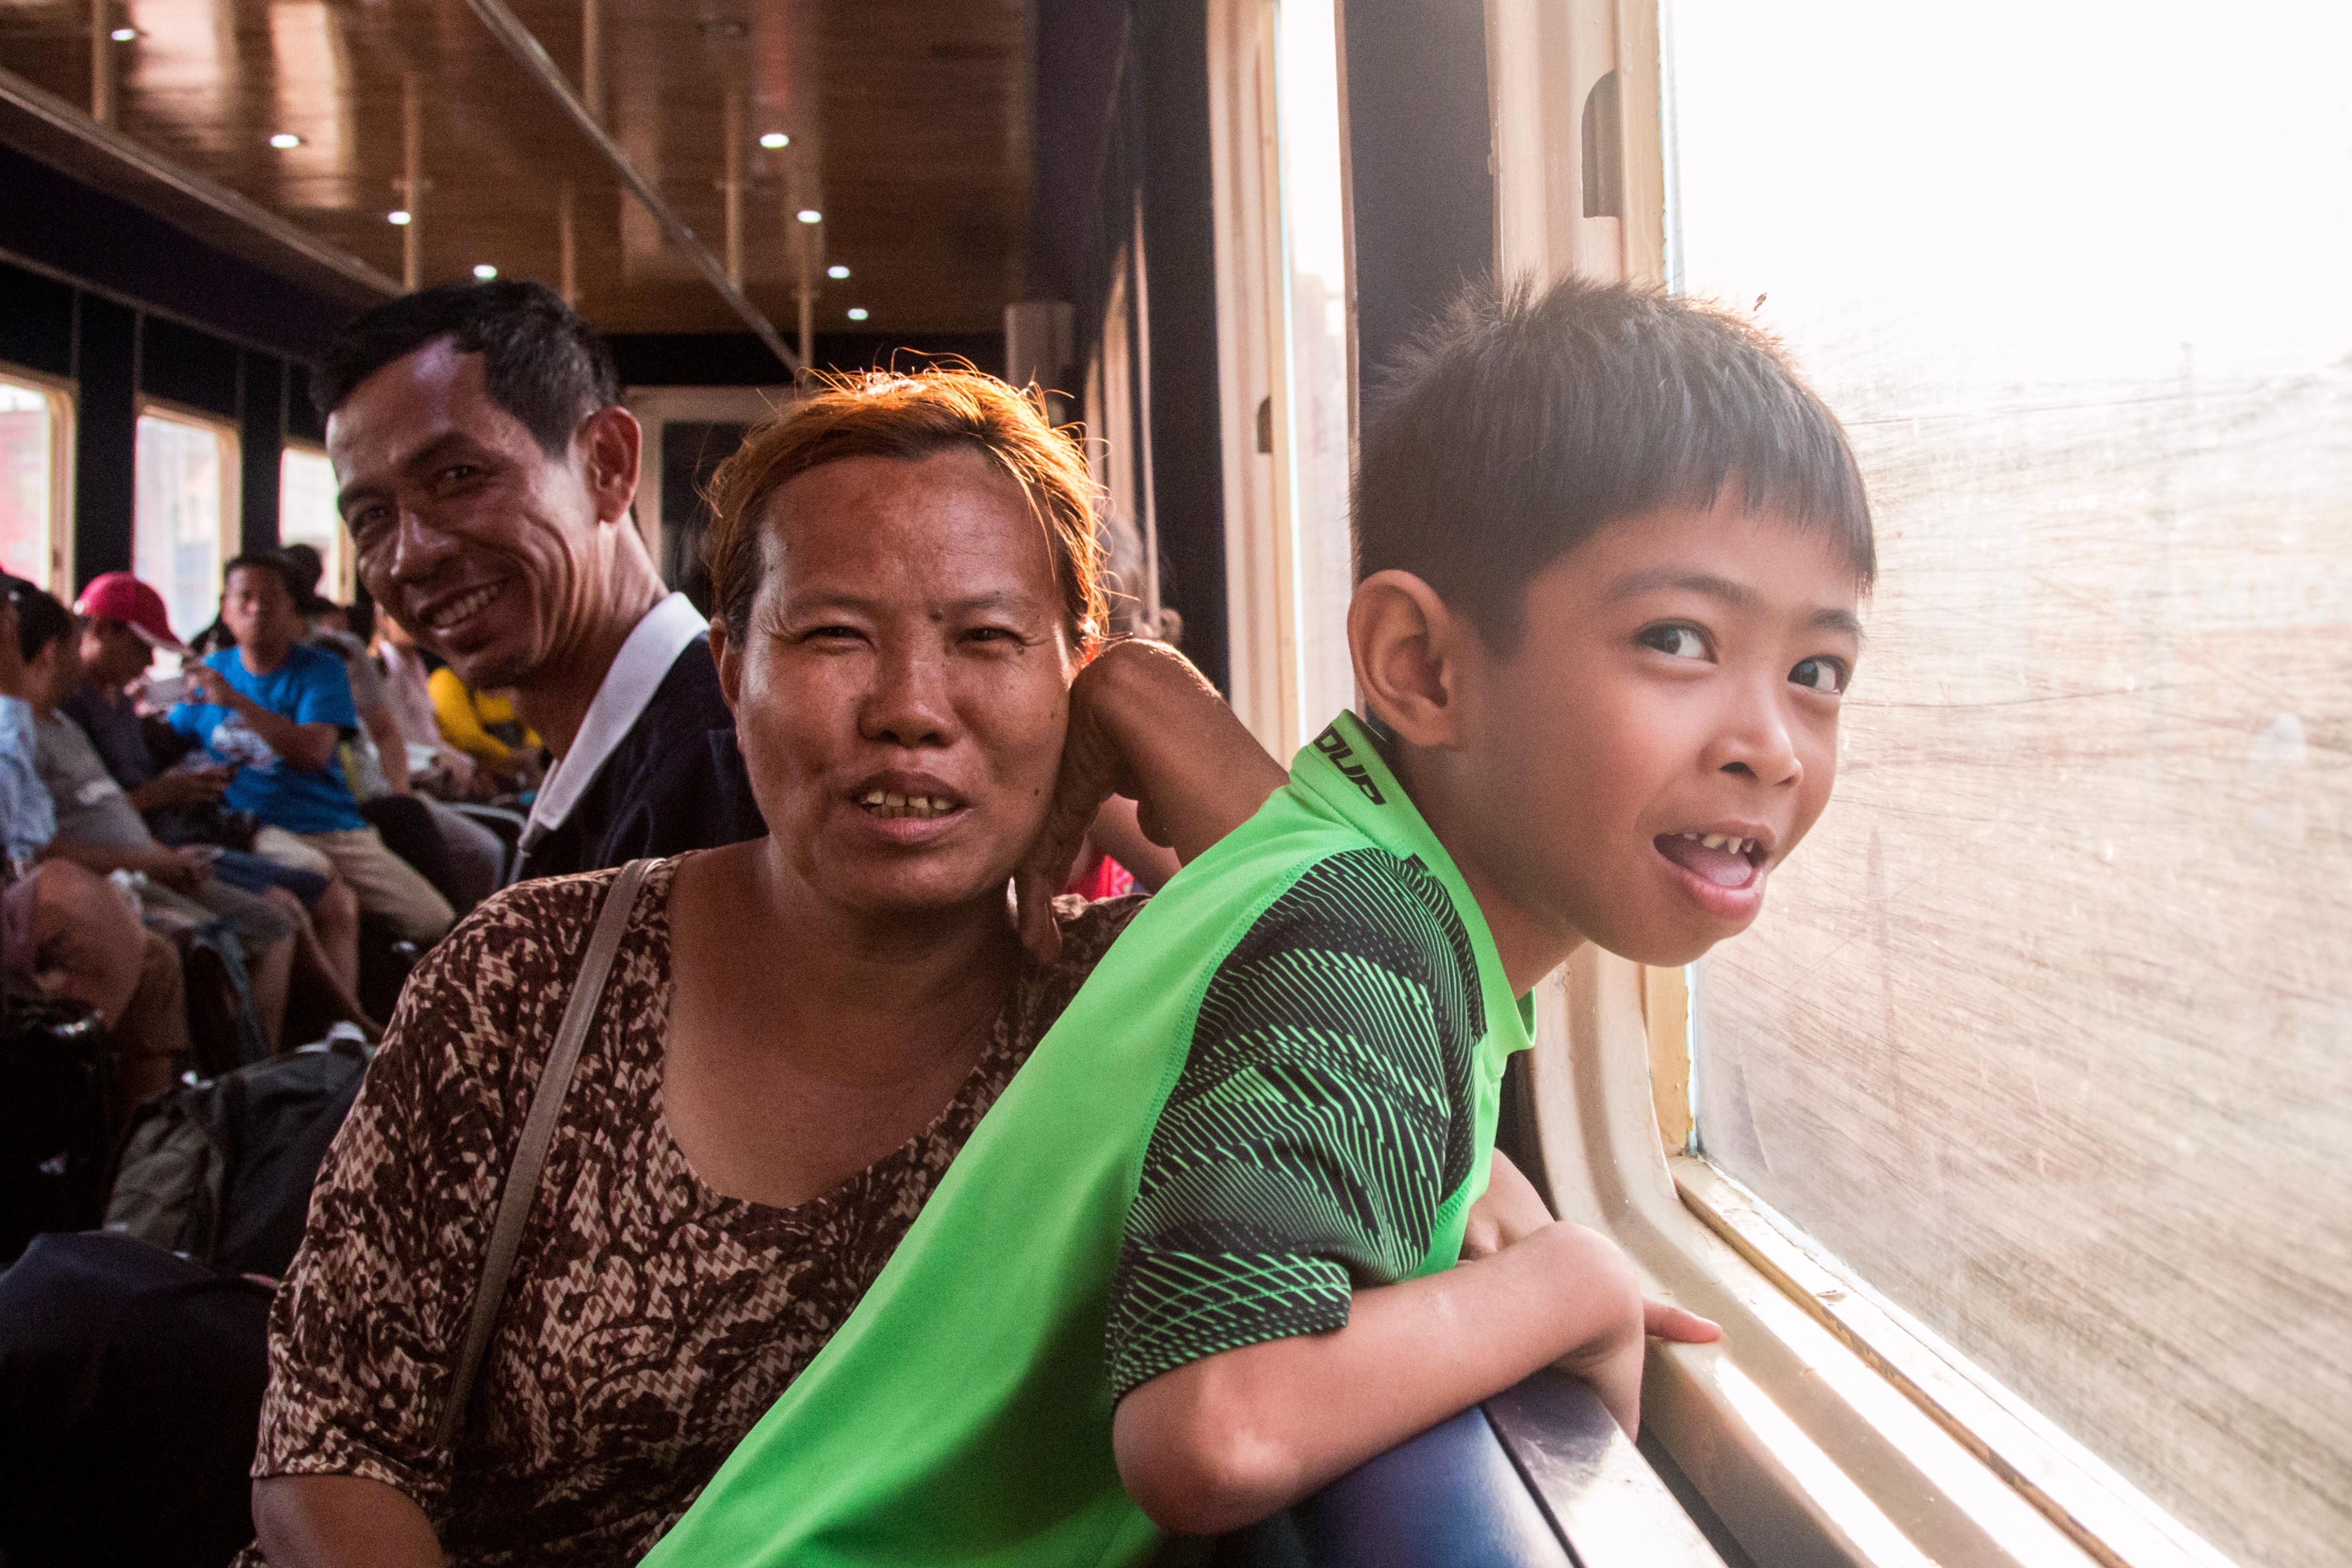 The thrill of the ride. Passengers seeking respite from the heat ride Phnom Penh's new airport shuttle train. (Eli Meixler—Time)